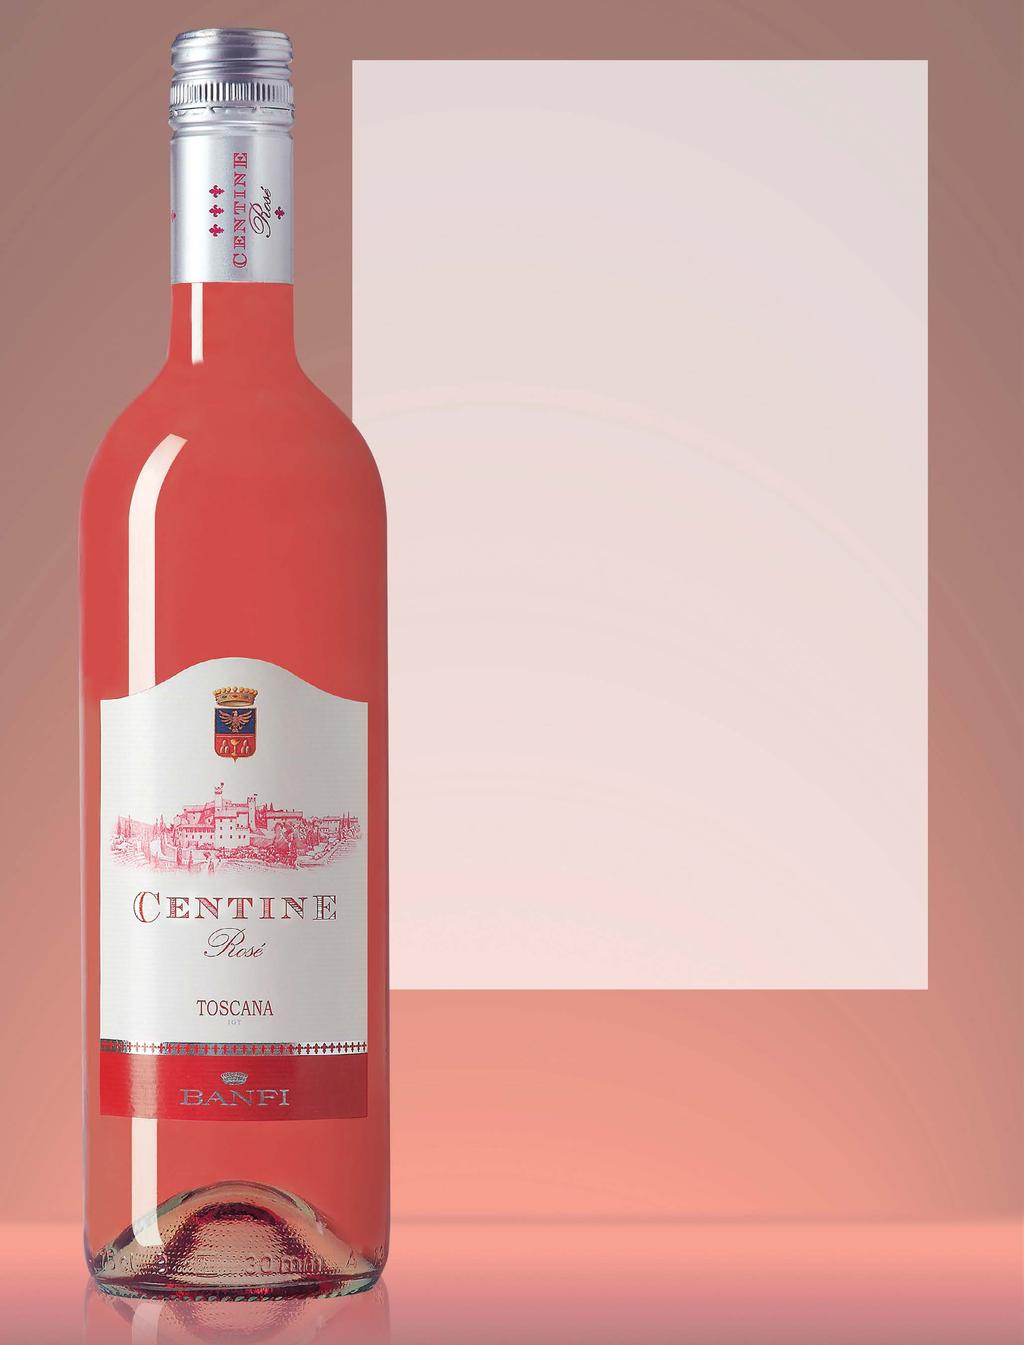 S U P E R P R E M I U M T I E R CENTINE ROSÉ DESCRIPTION SHEET Centine Rosé Toscana igt Production Area: Grape Varieties: Description: Hillside vineyards in the southern part of Tuscany.